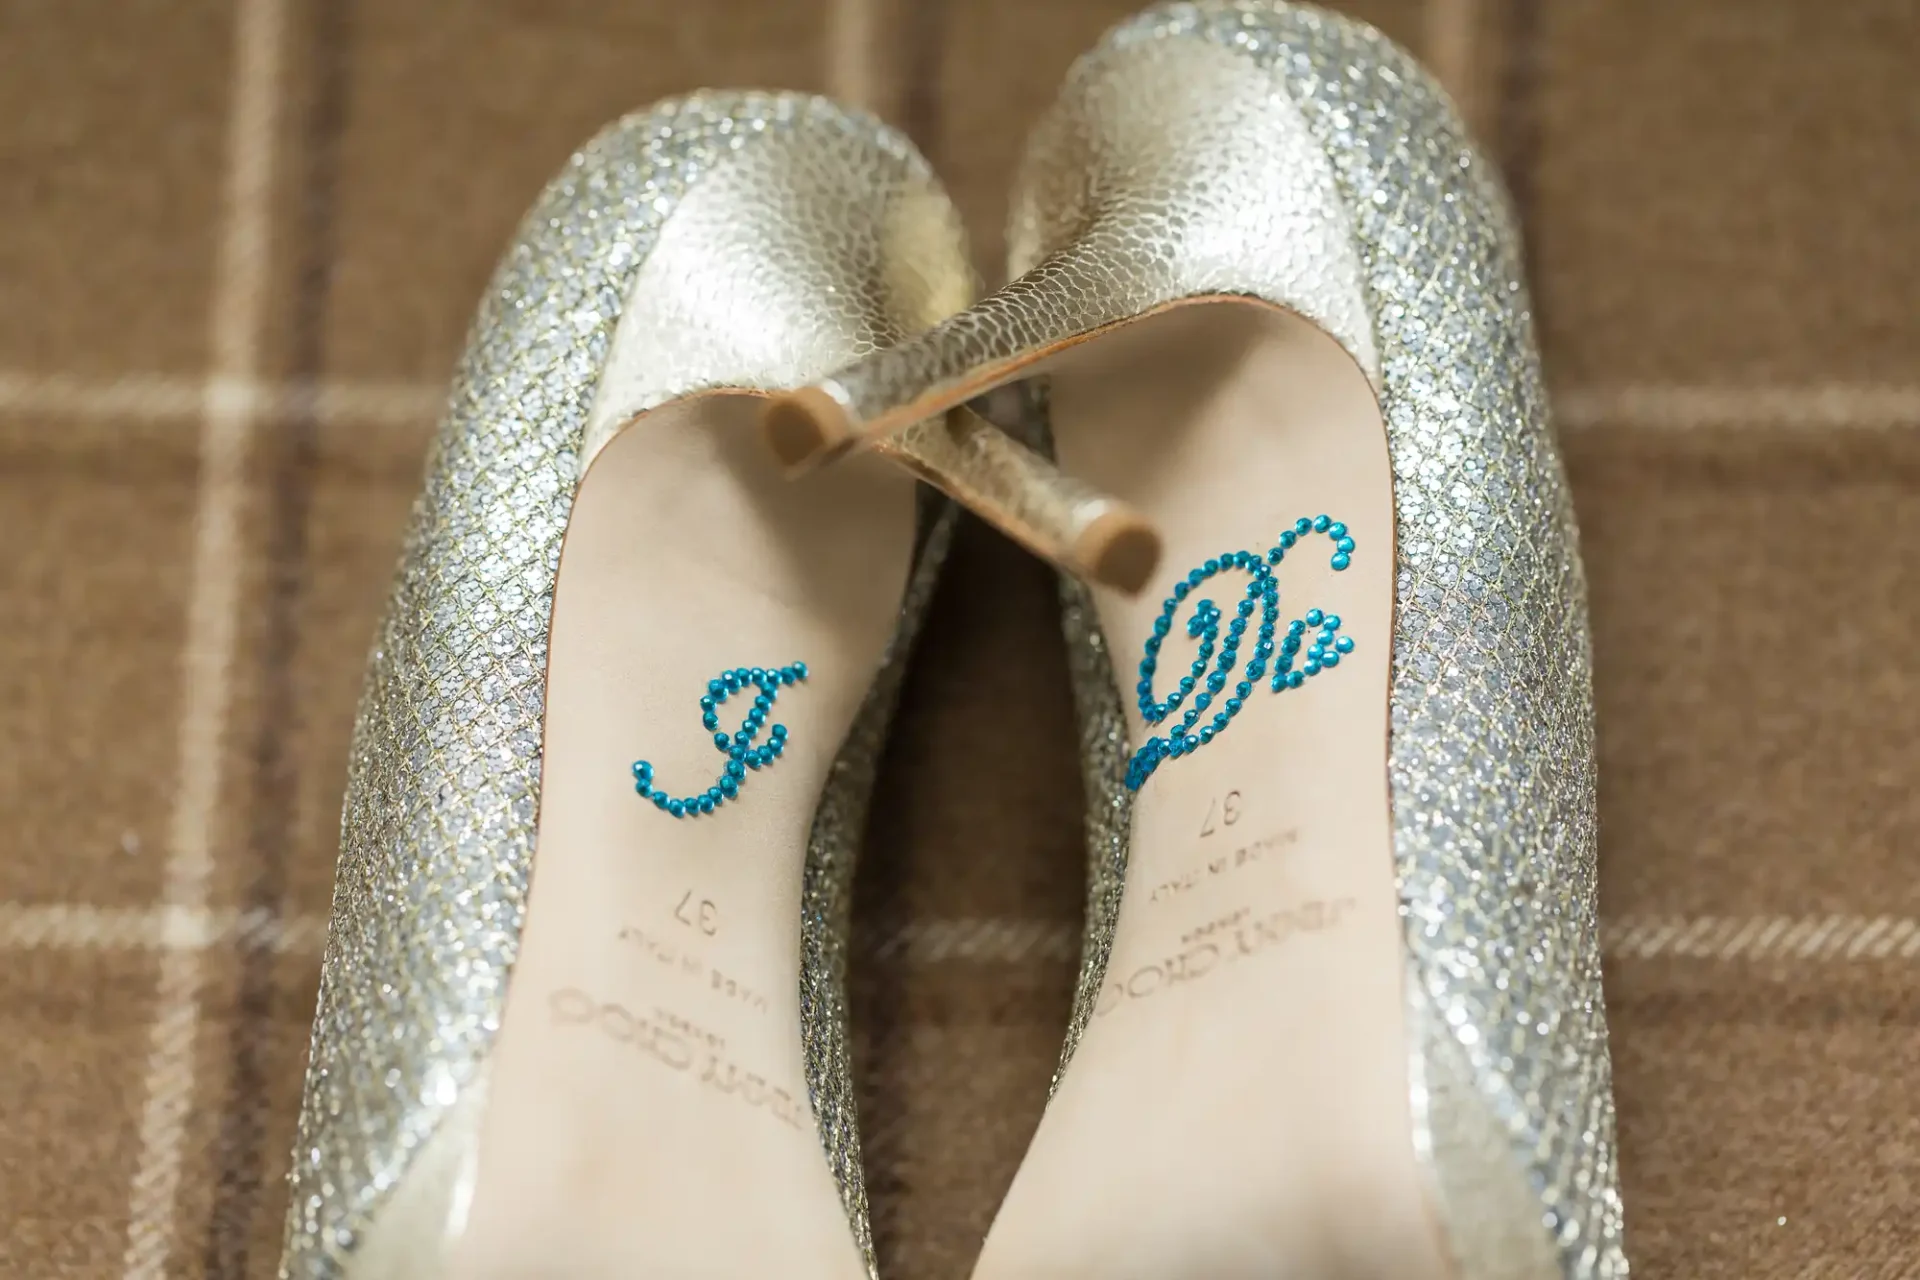 Silver glitter high-heeled shoes with "i do" written in blue on the insoles, positioned on a brown patterned background.